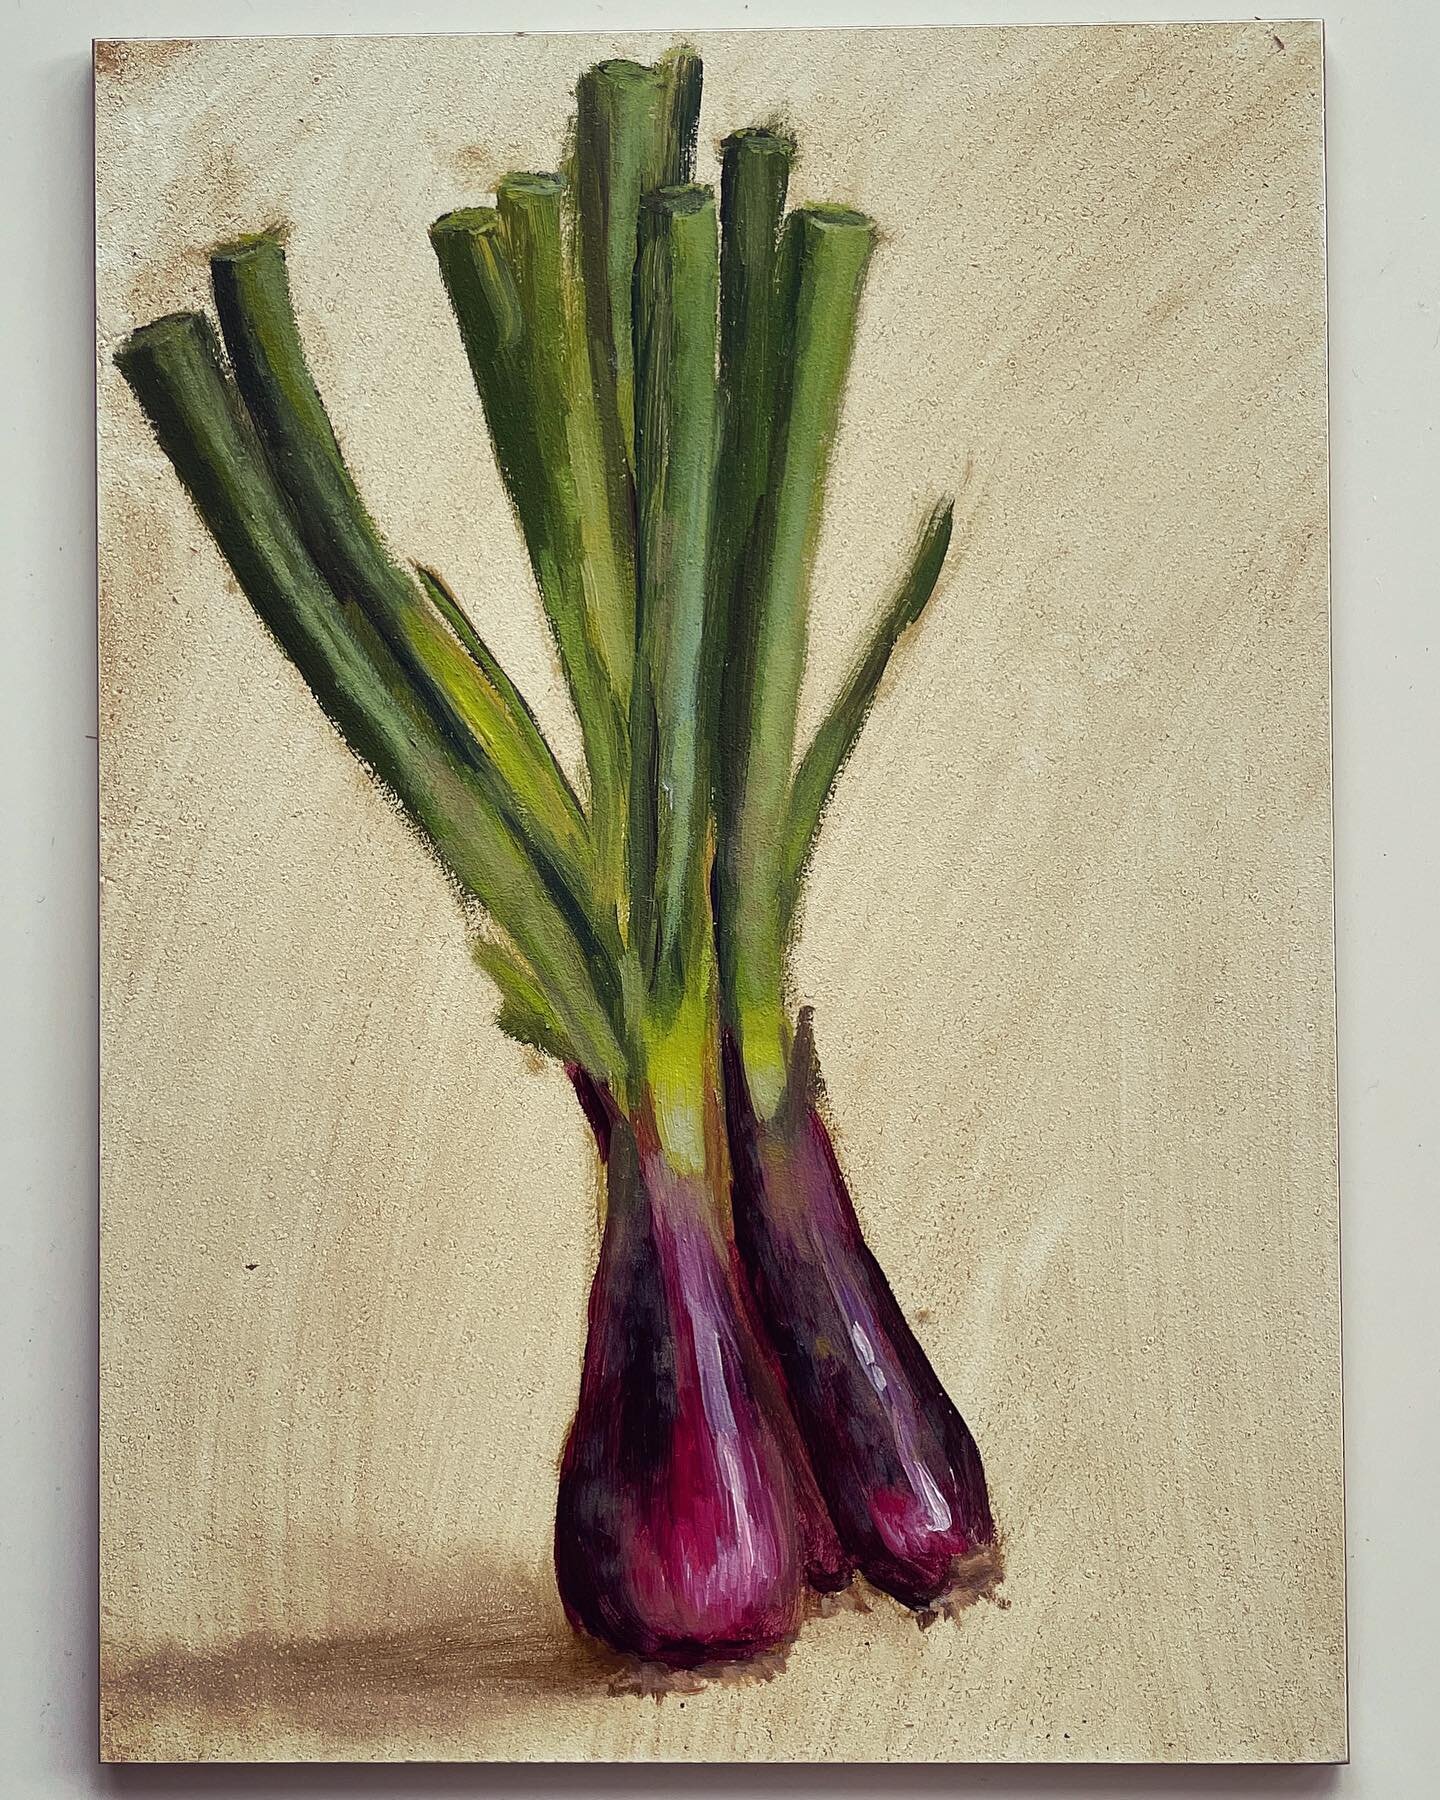 Some red spring onions - I put out a lot of alizarin on my palette by mistake so I am now just mostly painting purple / red things - stay tuned for aubergine, radicchio and more!